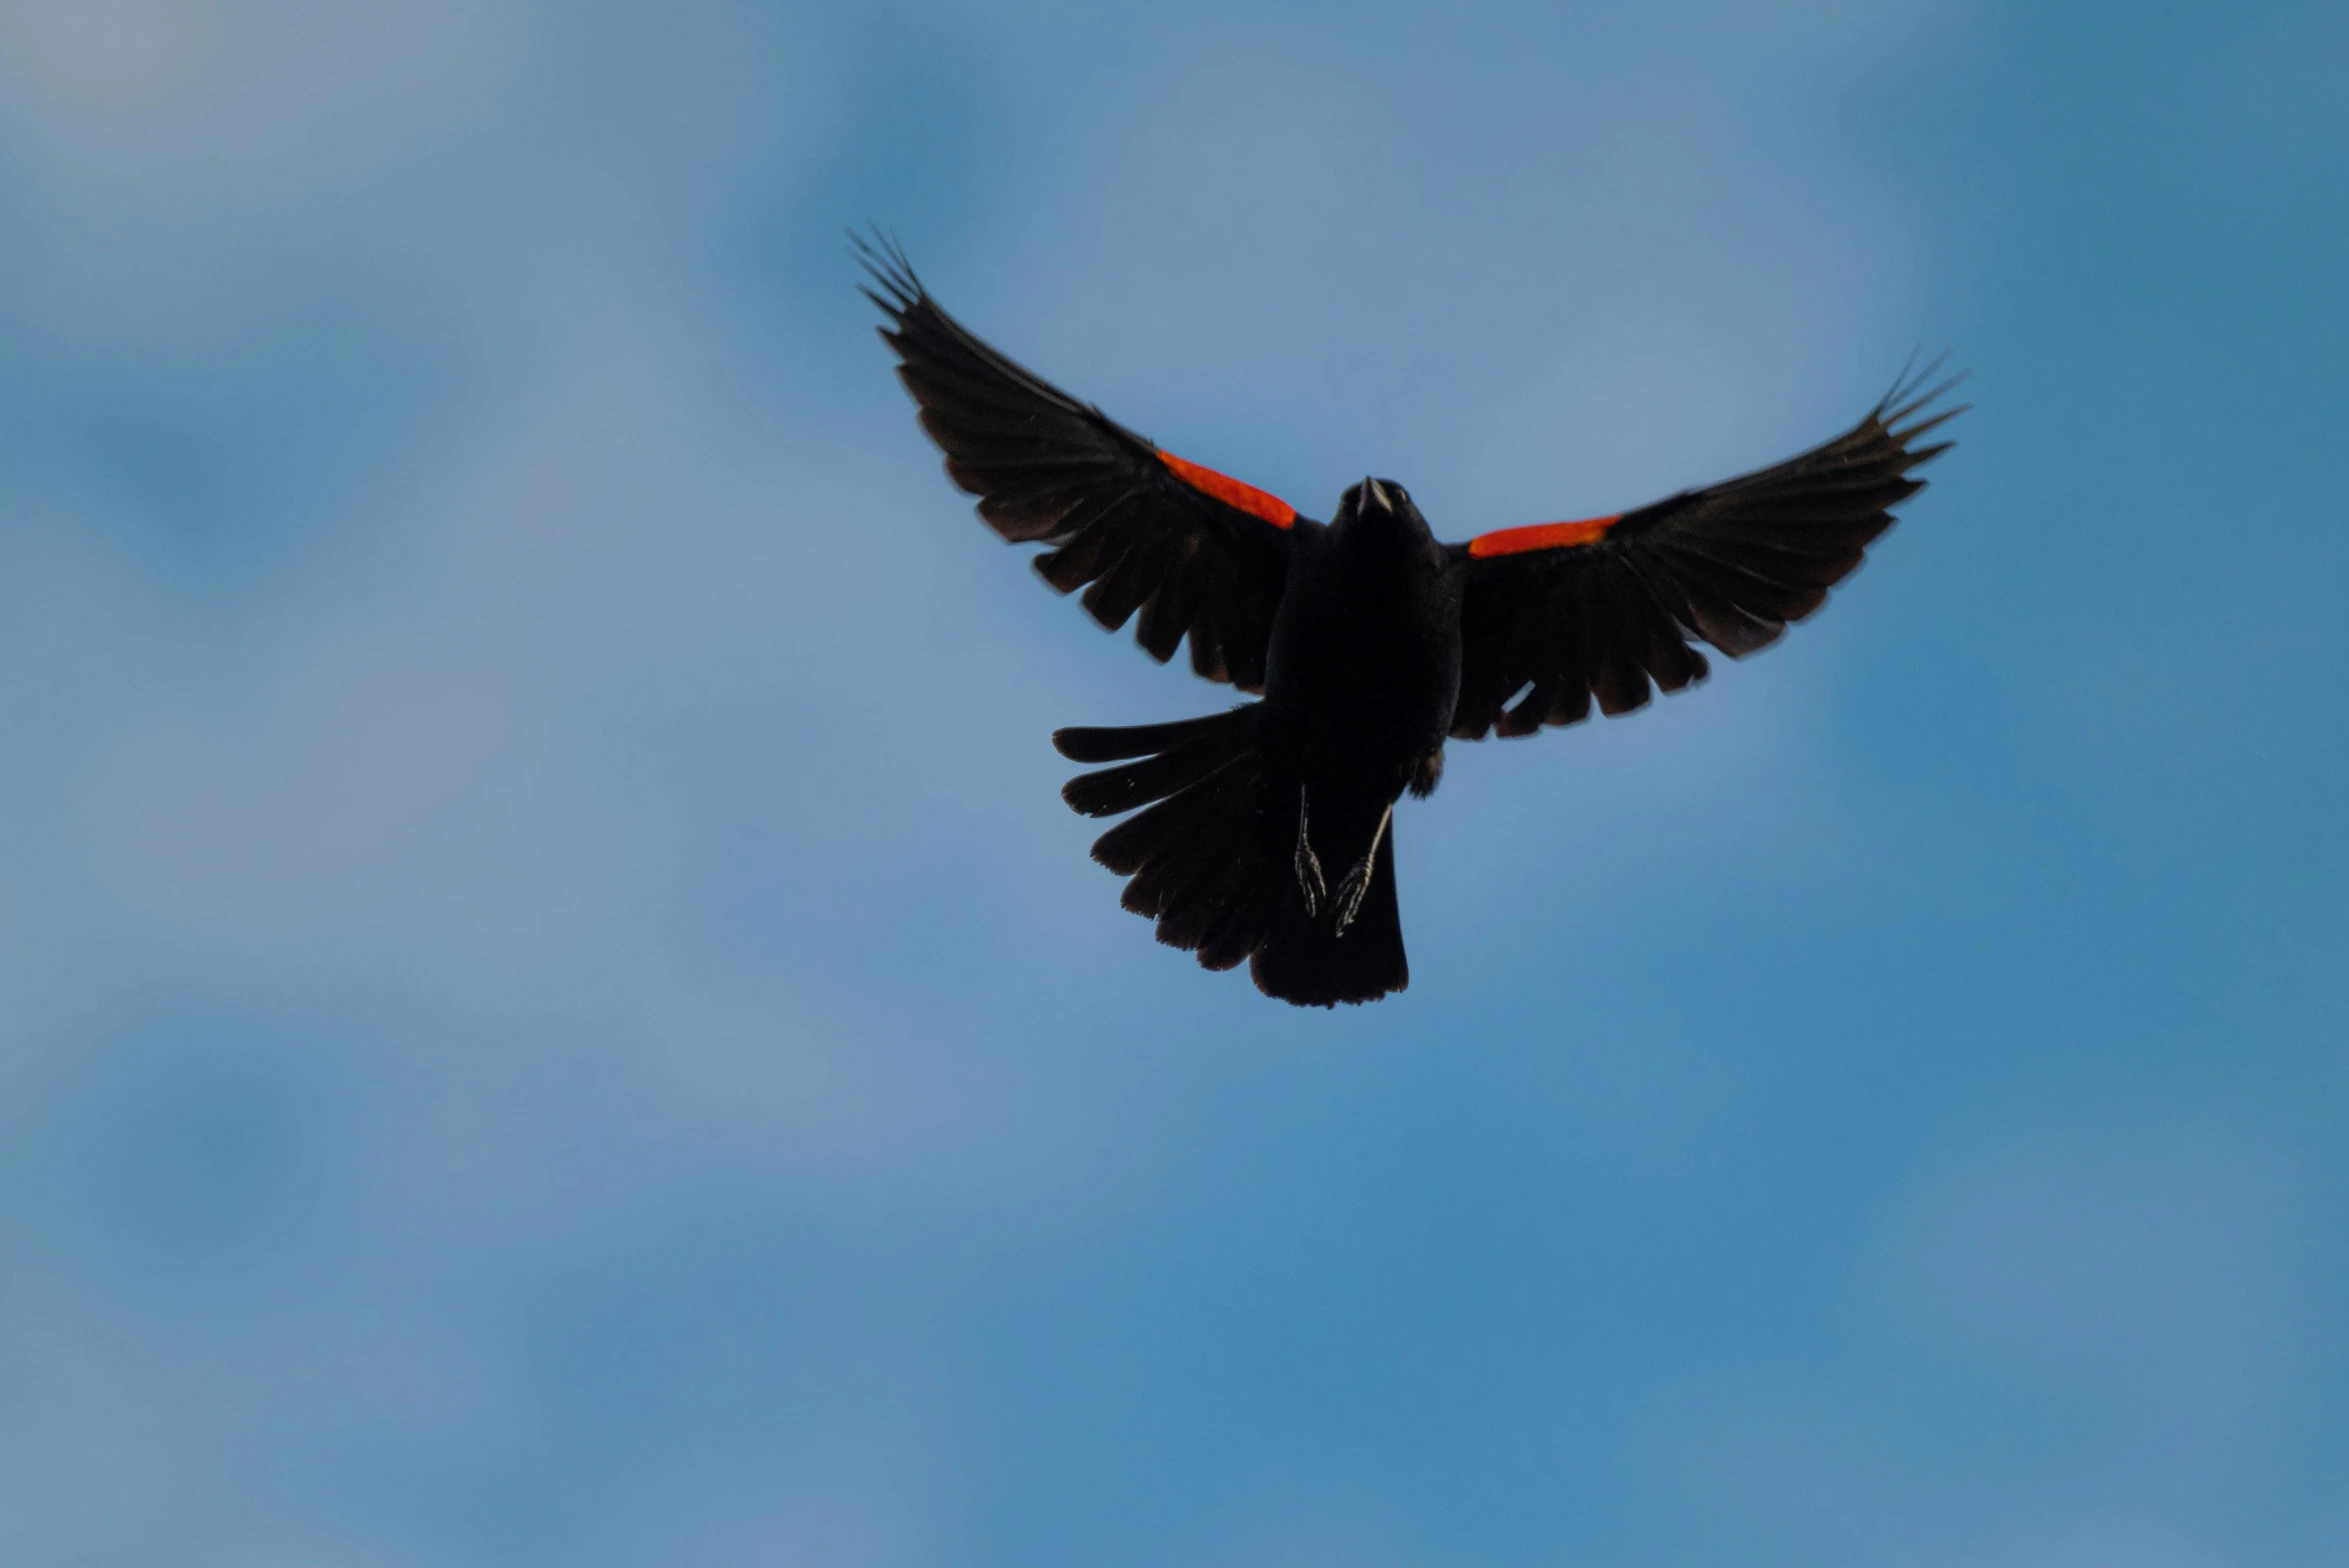 the bird is black and red with white wings